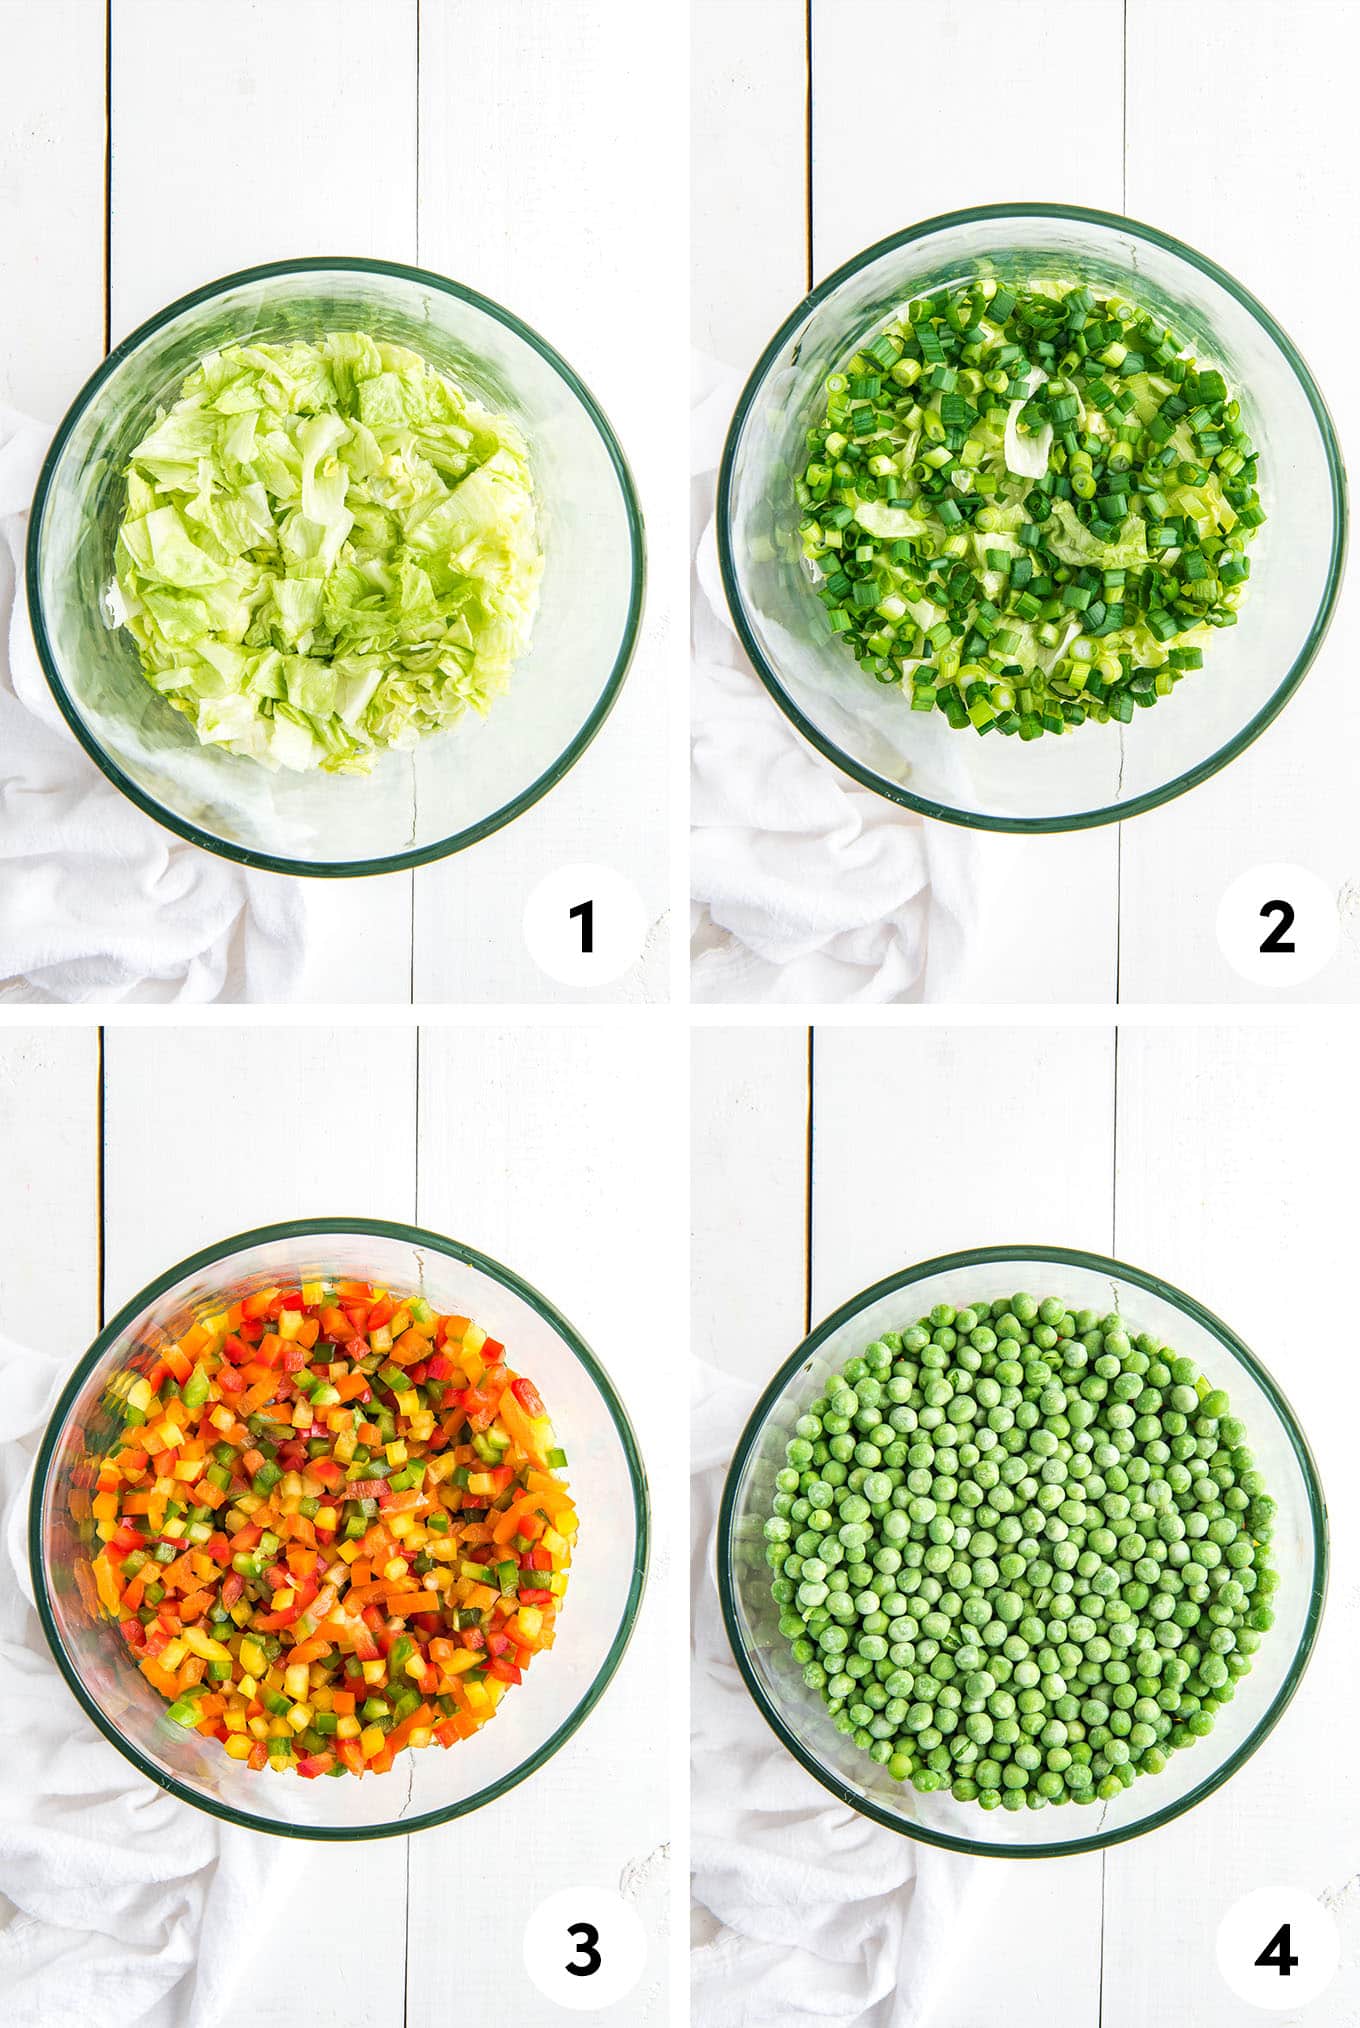 Collage of images showing layering the lettuce, green onions, peppers, and peas.